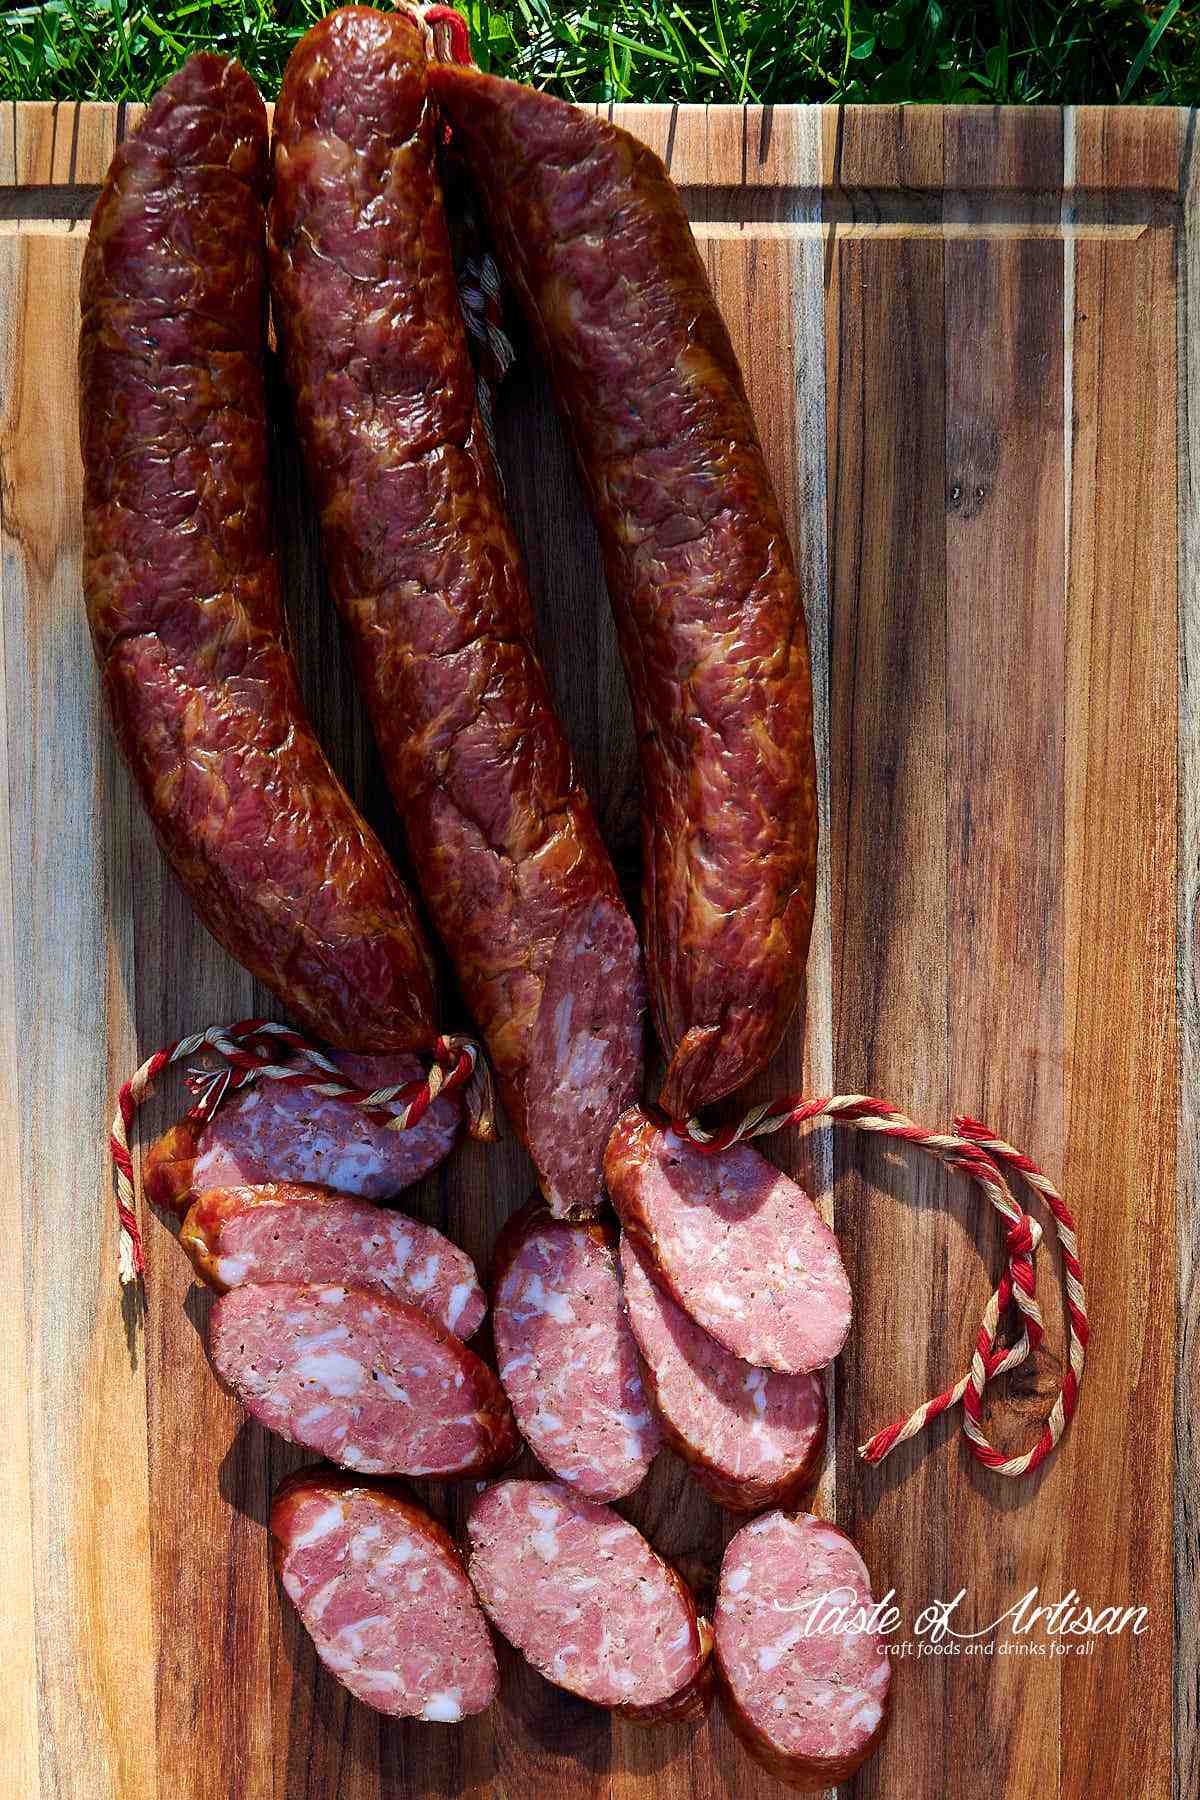 Why is andouille sausage so good?